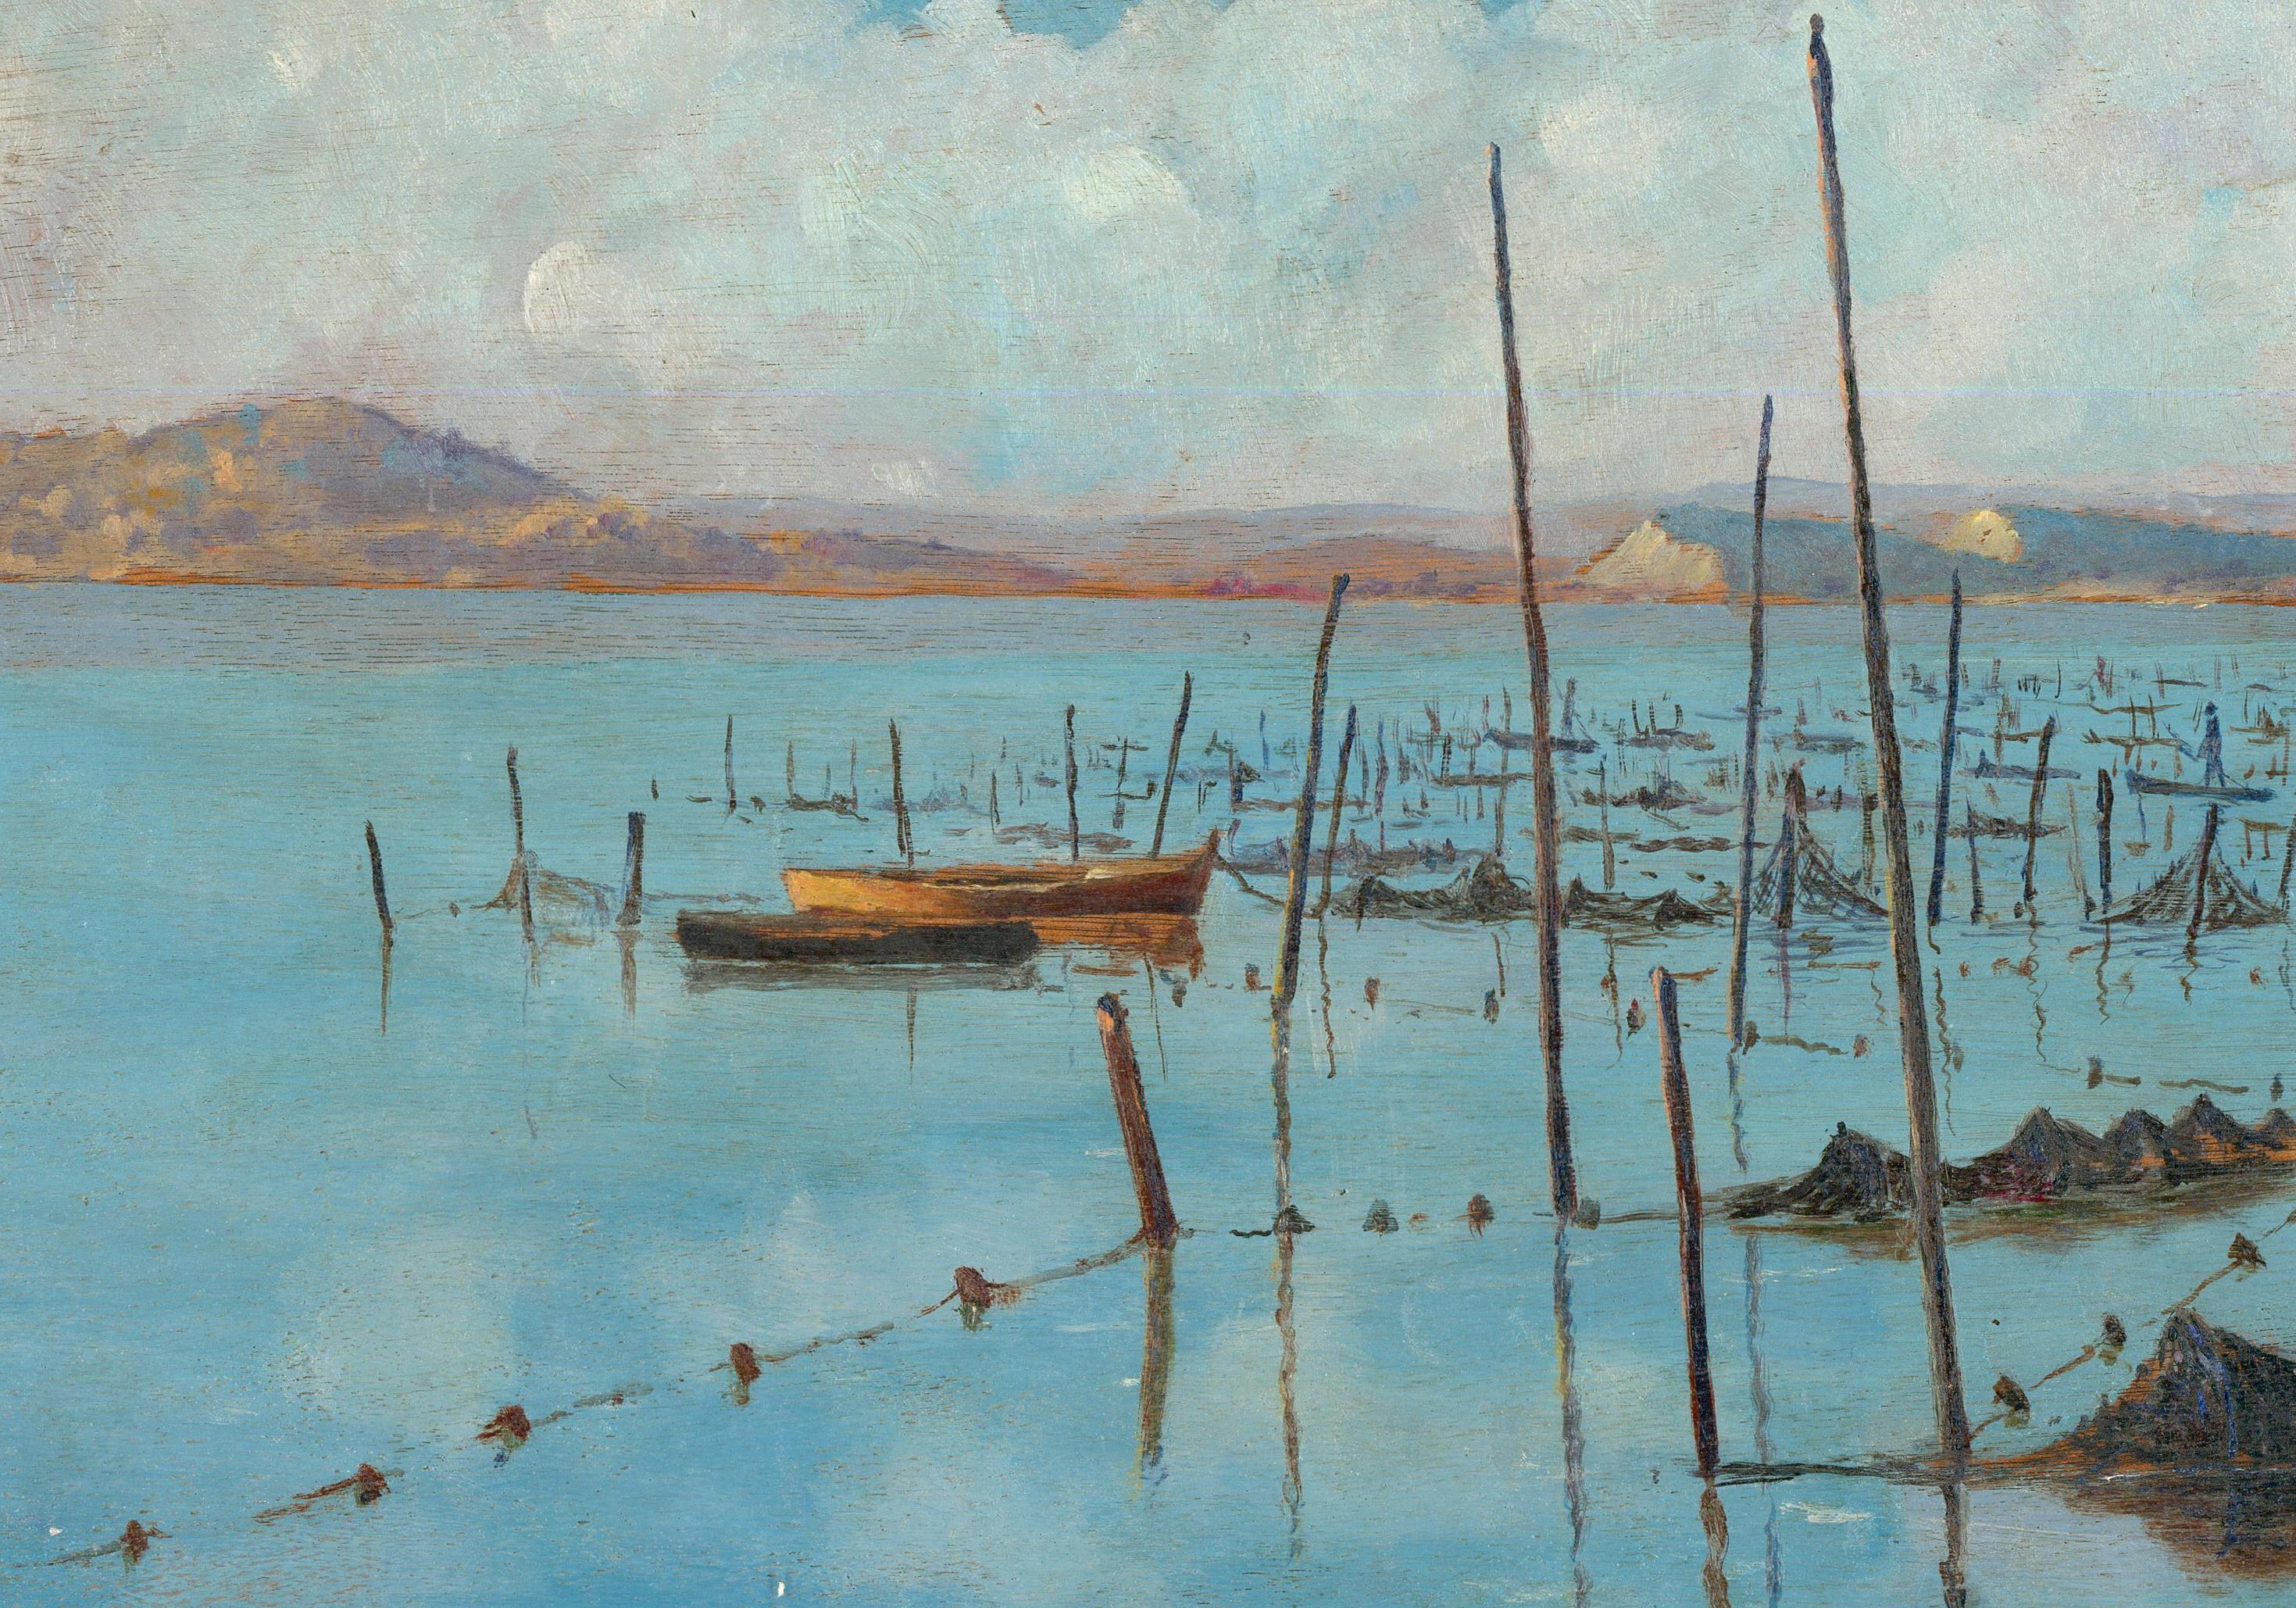 Framed Mid 20th Century Oil - Lake Titicaca, Peru - Painting by Unknown